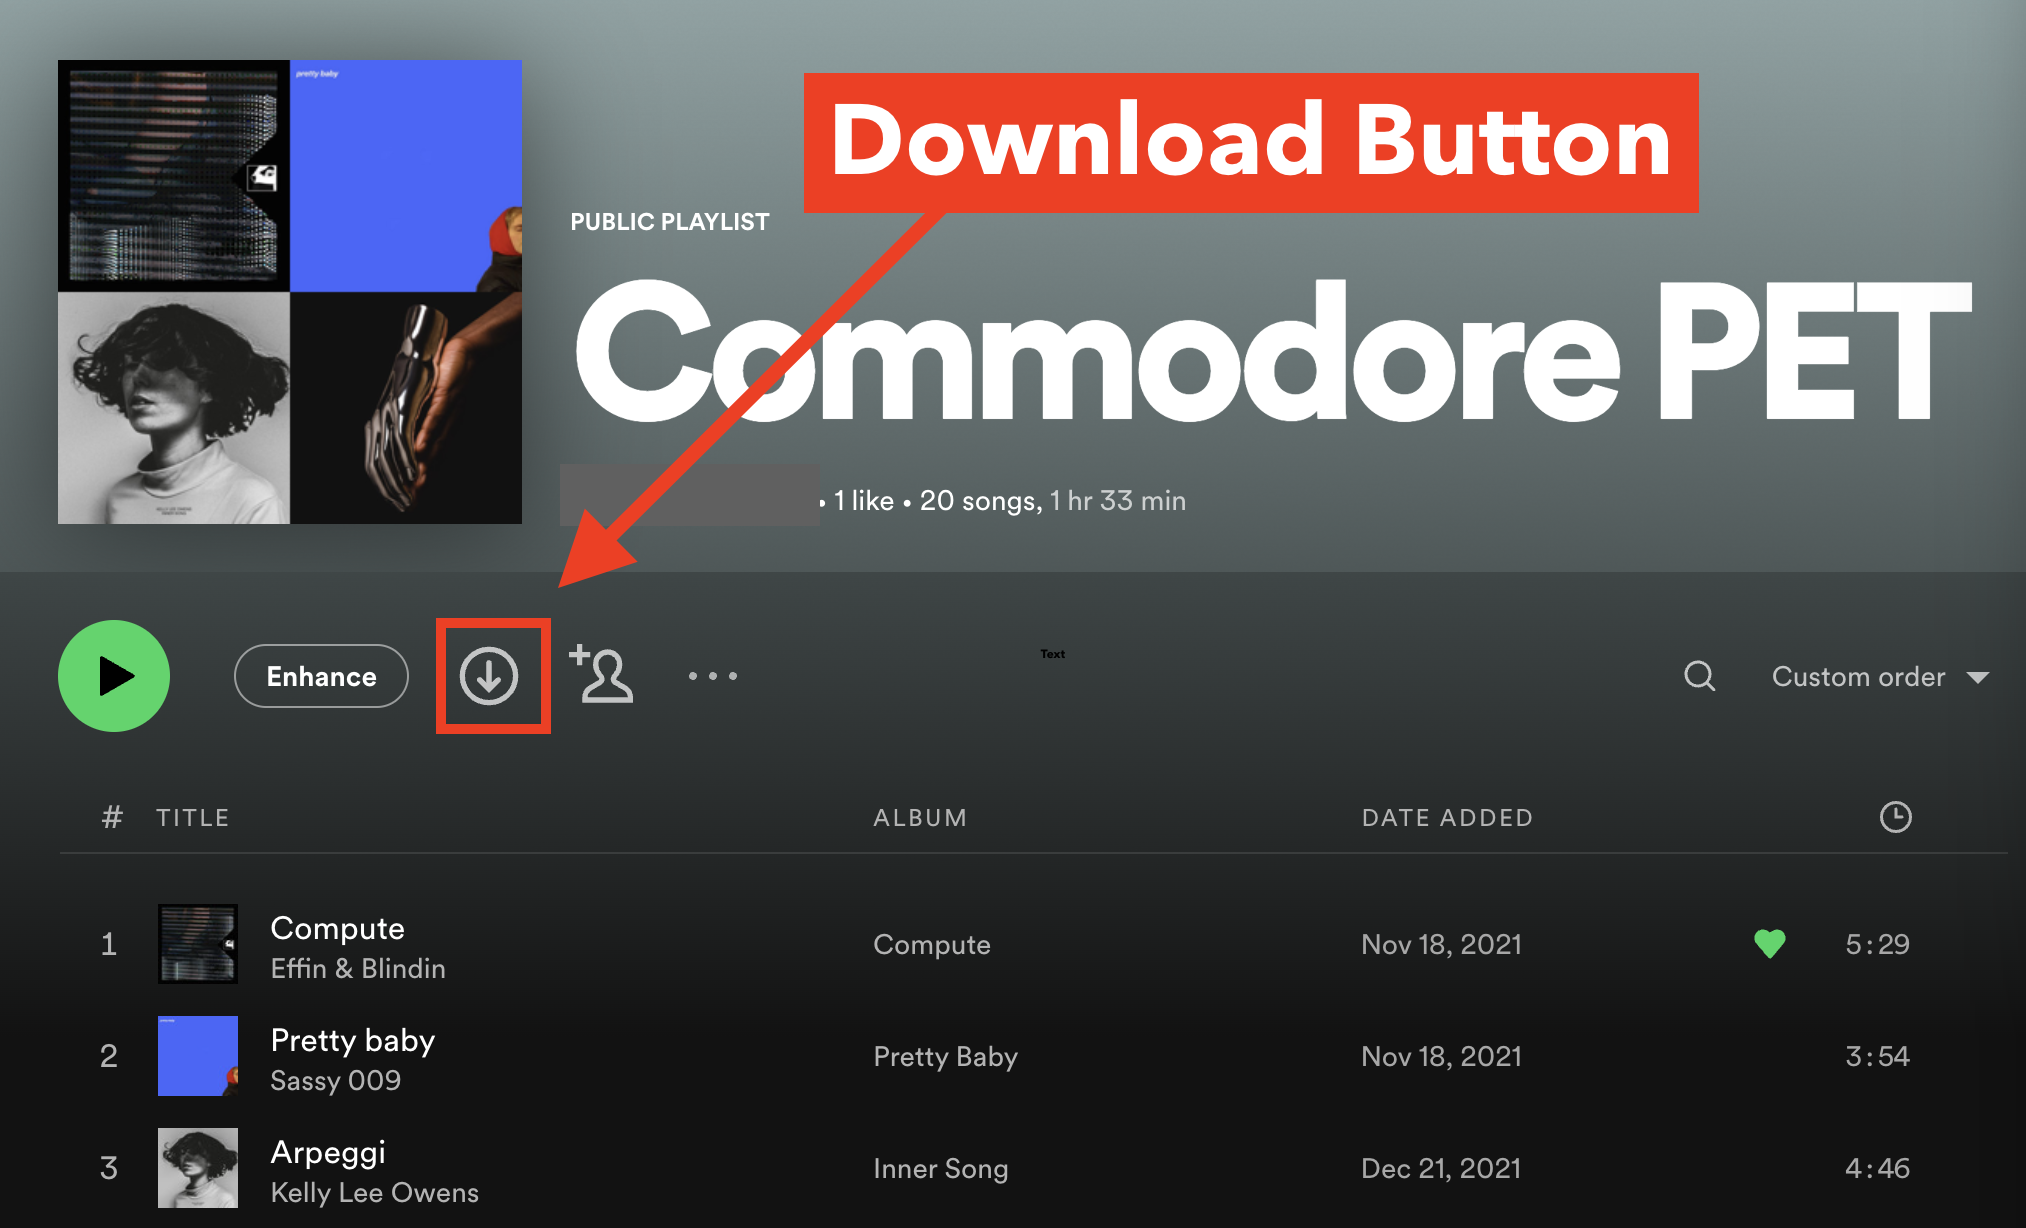 How to download music from Spotify and listen to your favorite